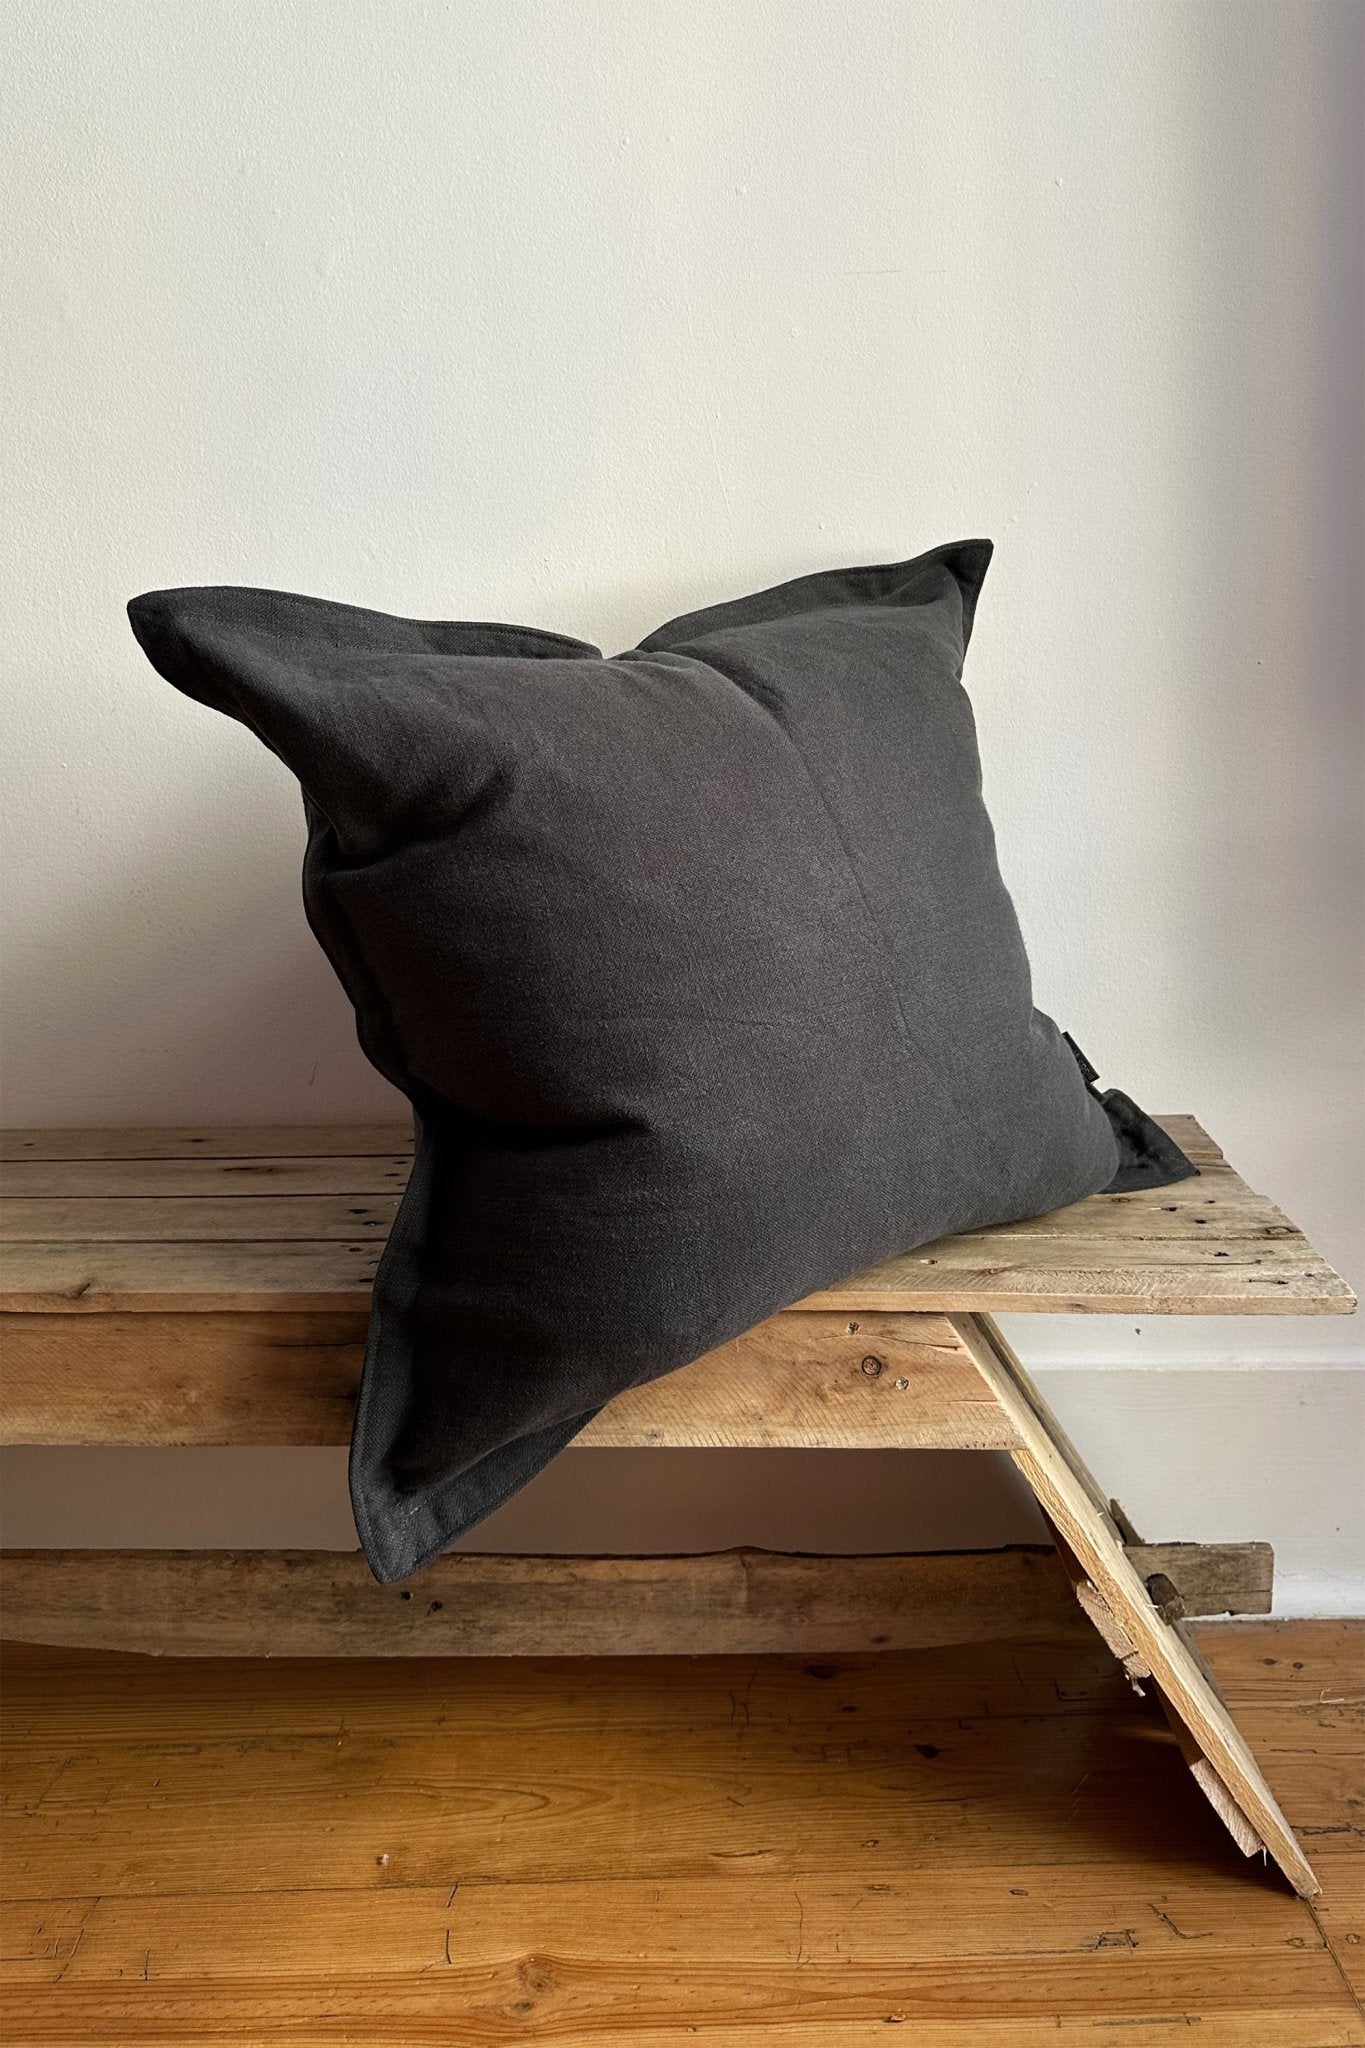 Utility Linen Oxford Cushion Cover in Charcoal Grey - Biggs & Hill - Cushion Covers - 18 inch - 24 inch - 30 inch